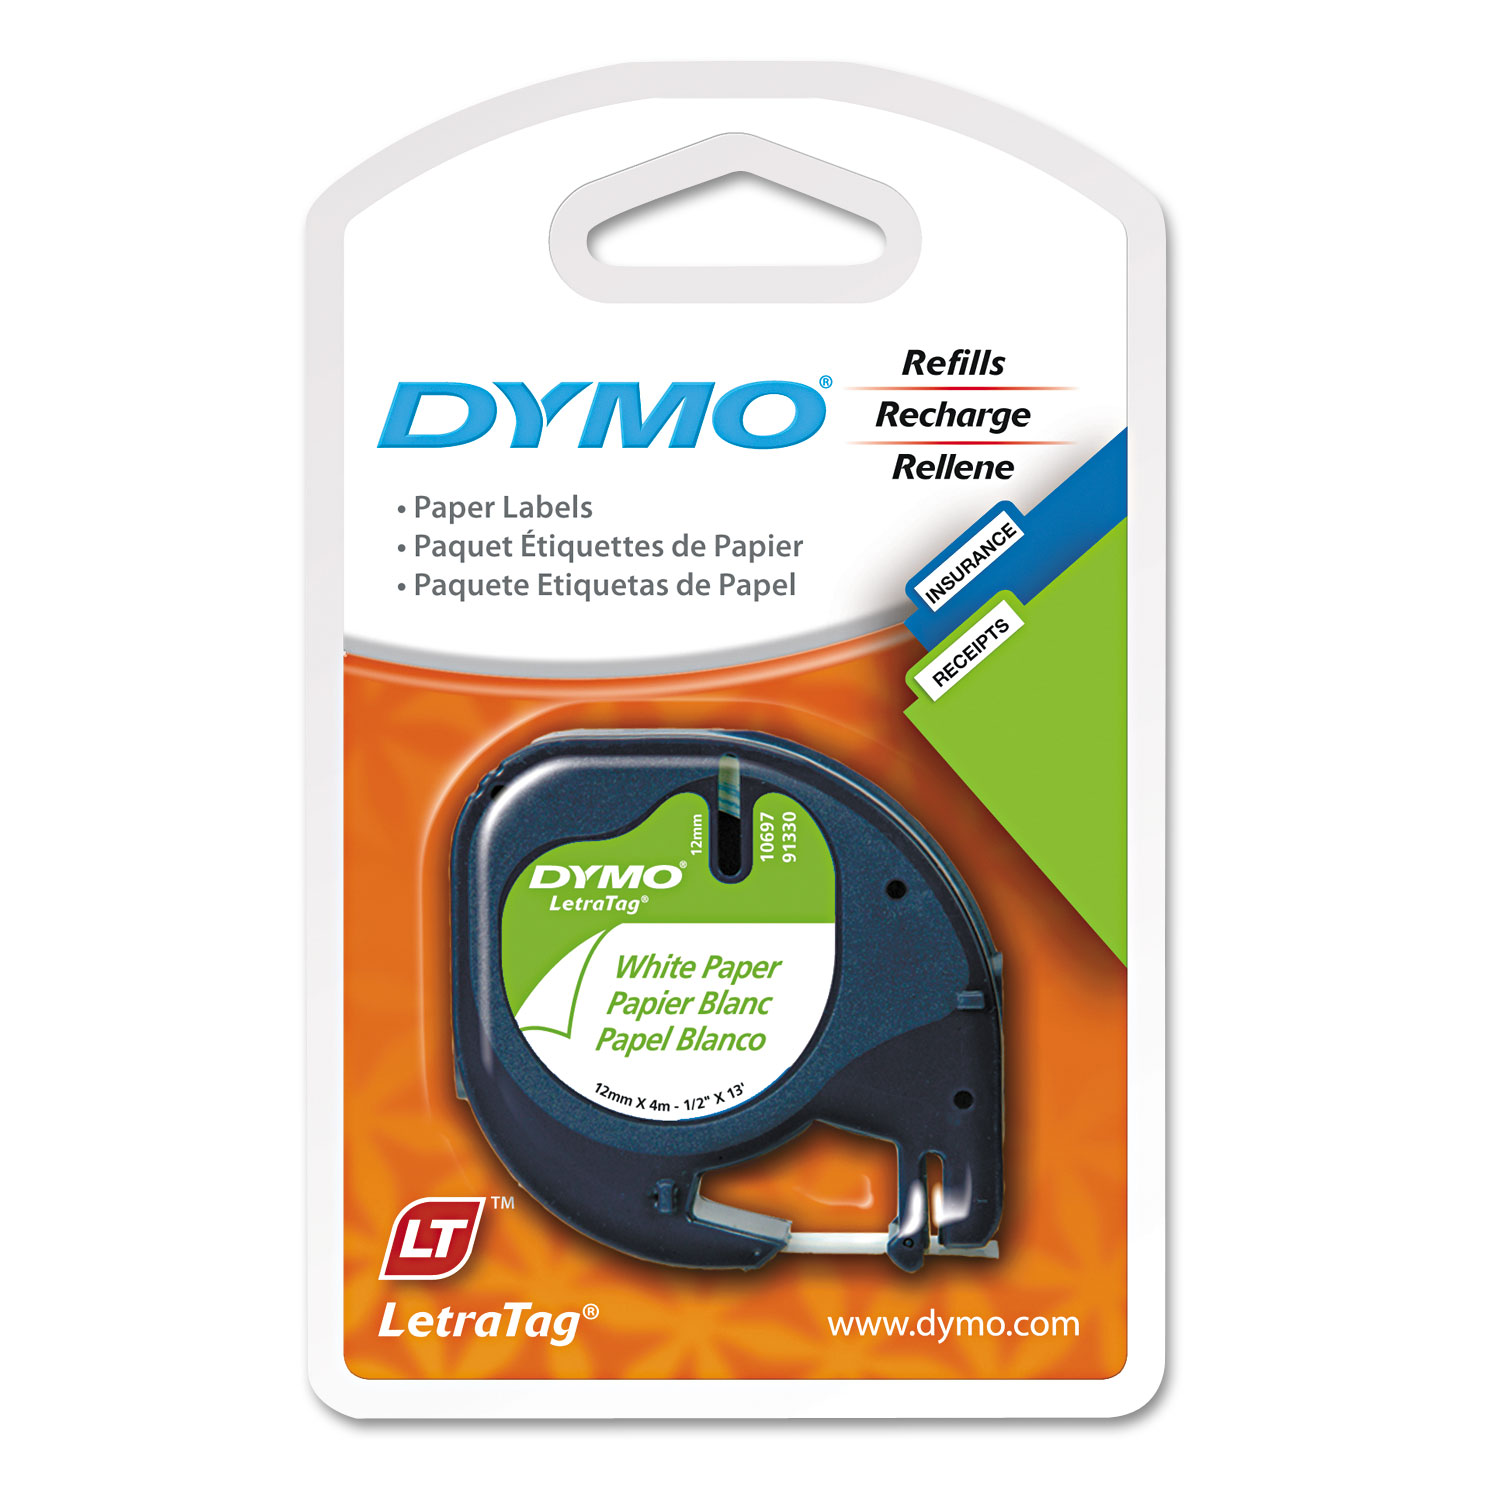  DYMO 10697 LetraTag Paper Label Tape Cassettes, 0.5 x 13 ft, White, 2/Pack (DYM10697) 